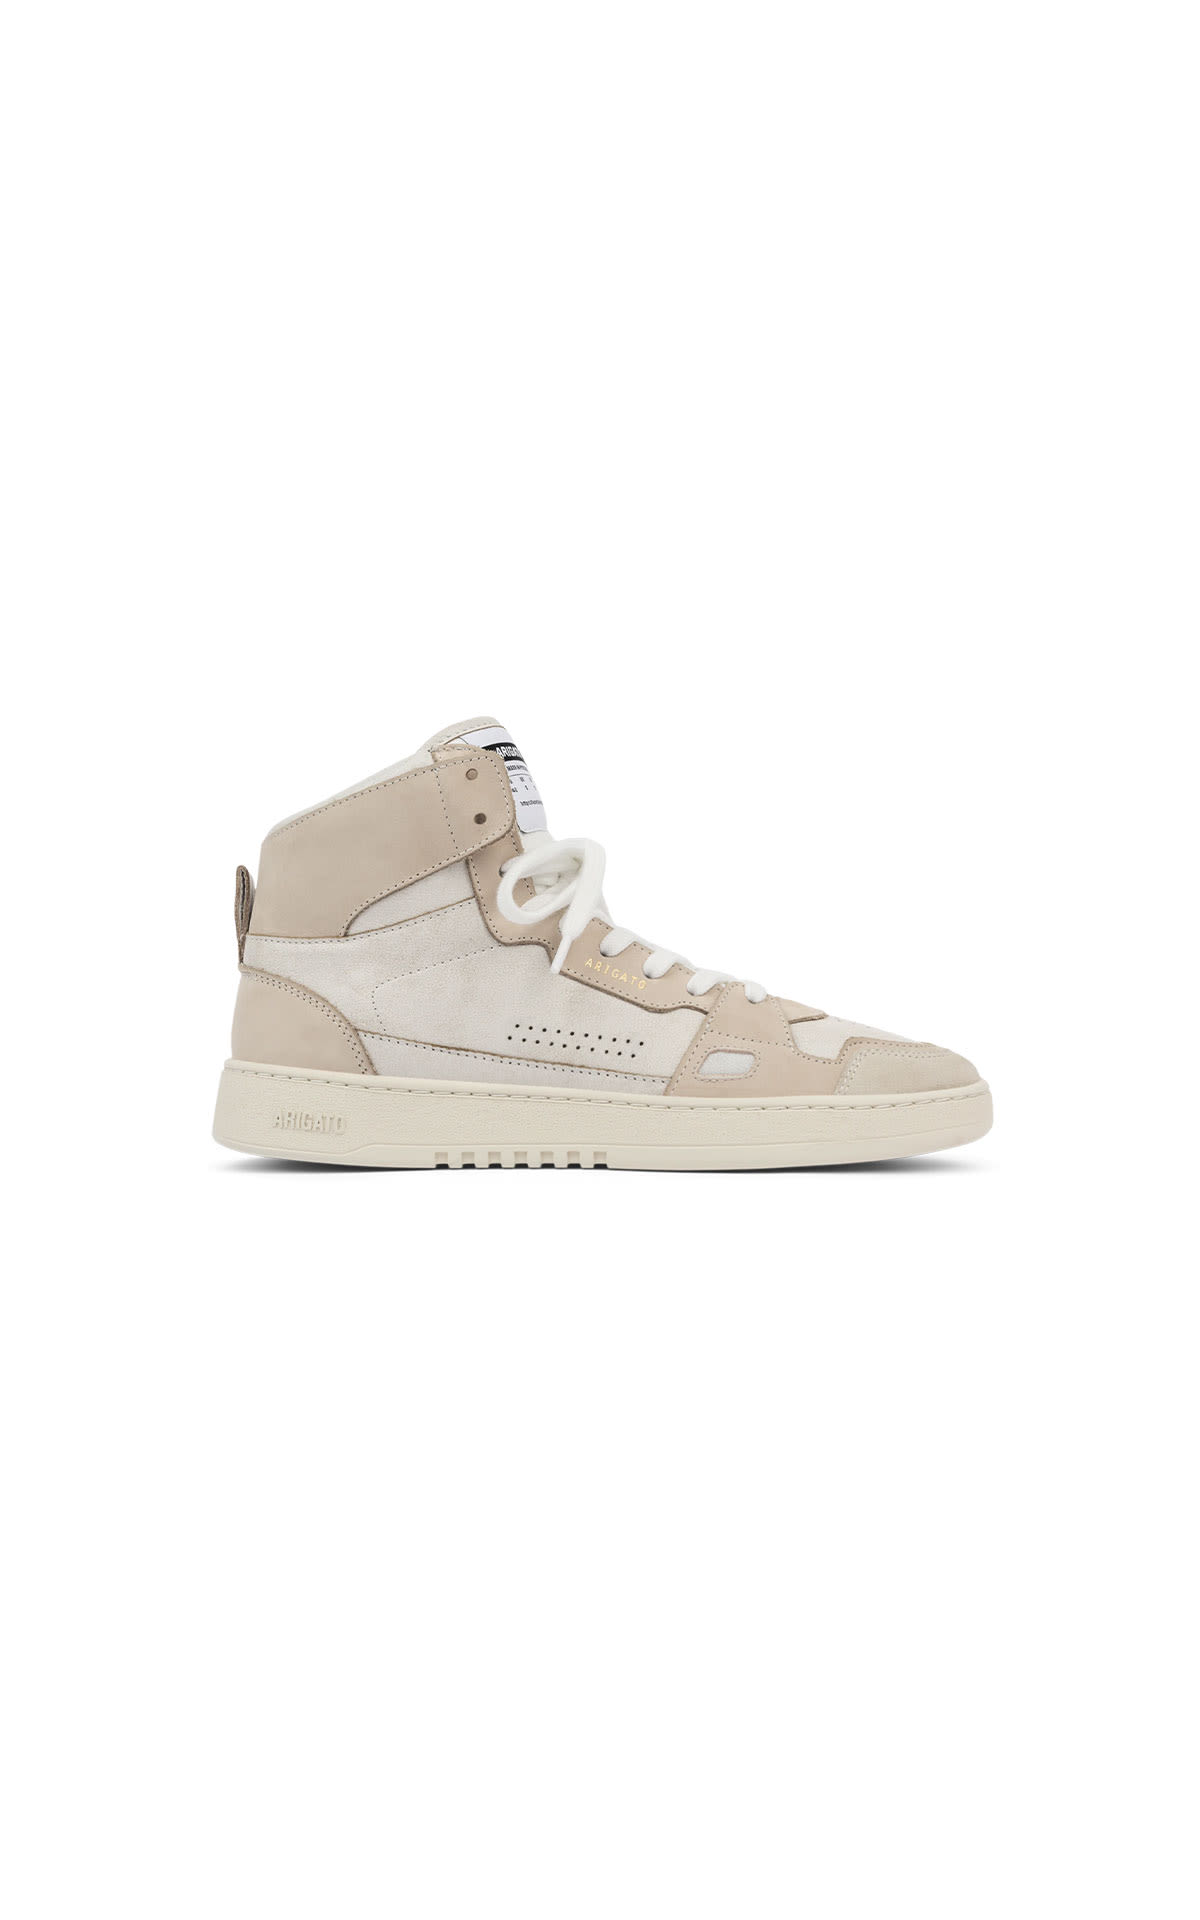 Axel Arigato Di hi sneakers mens beige from Bicester Village